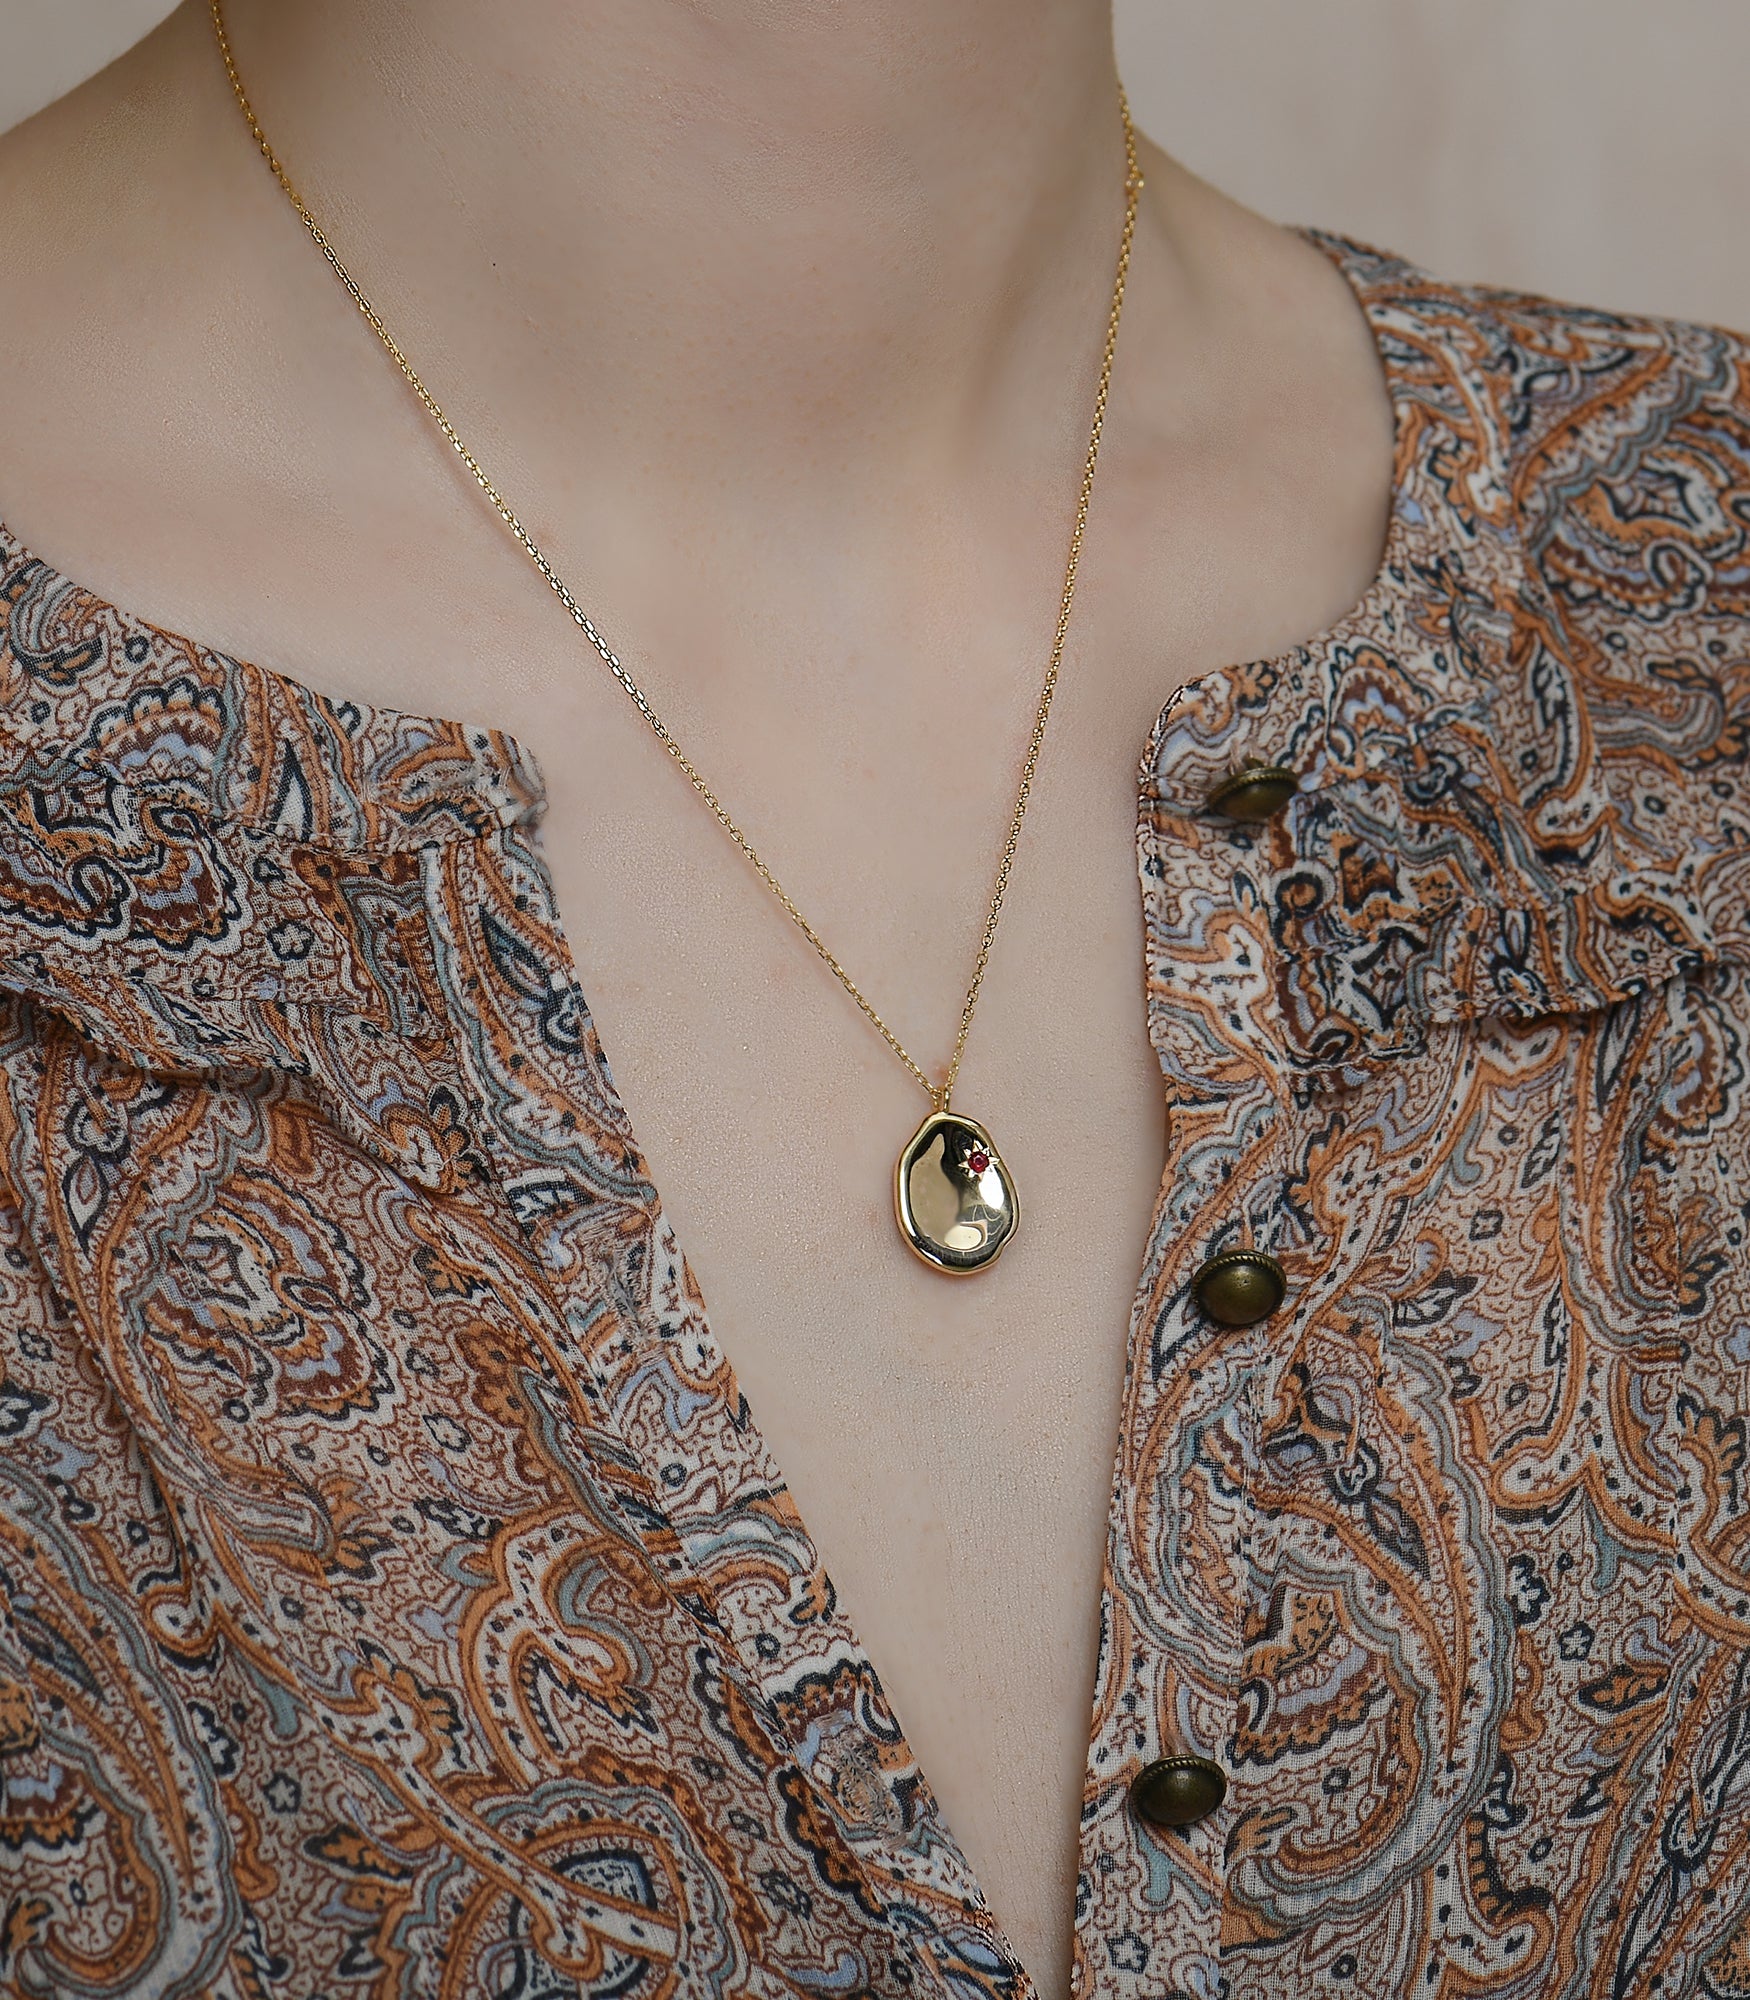 A model wears a gold vermeil necklace with a pebble pendant featuring a ruby stone.